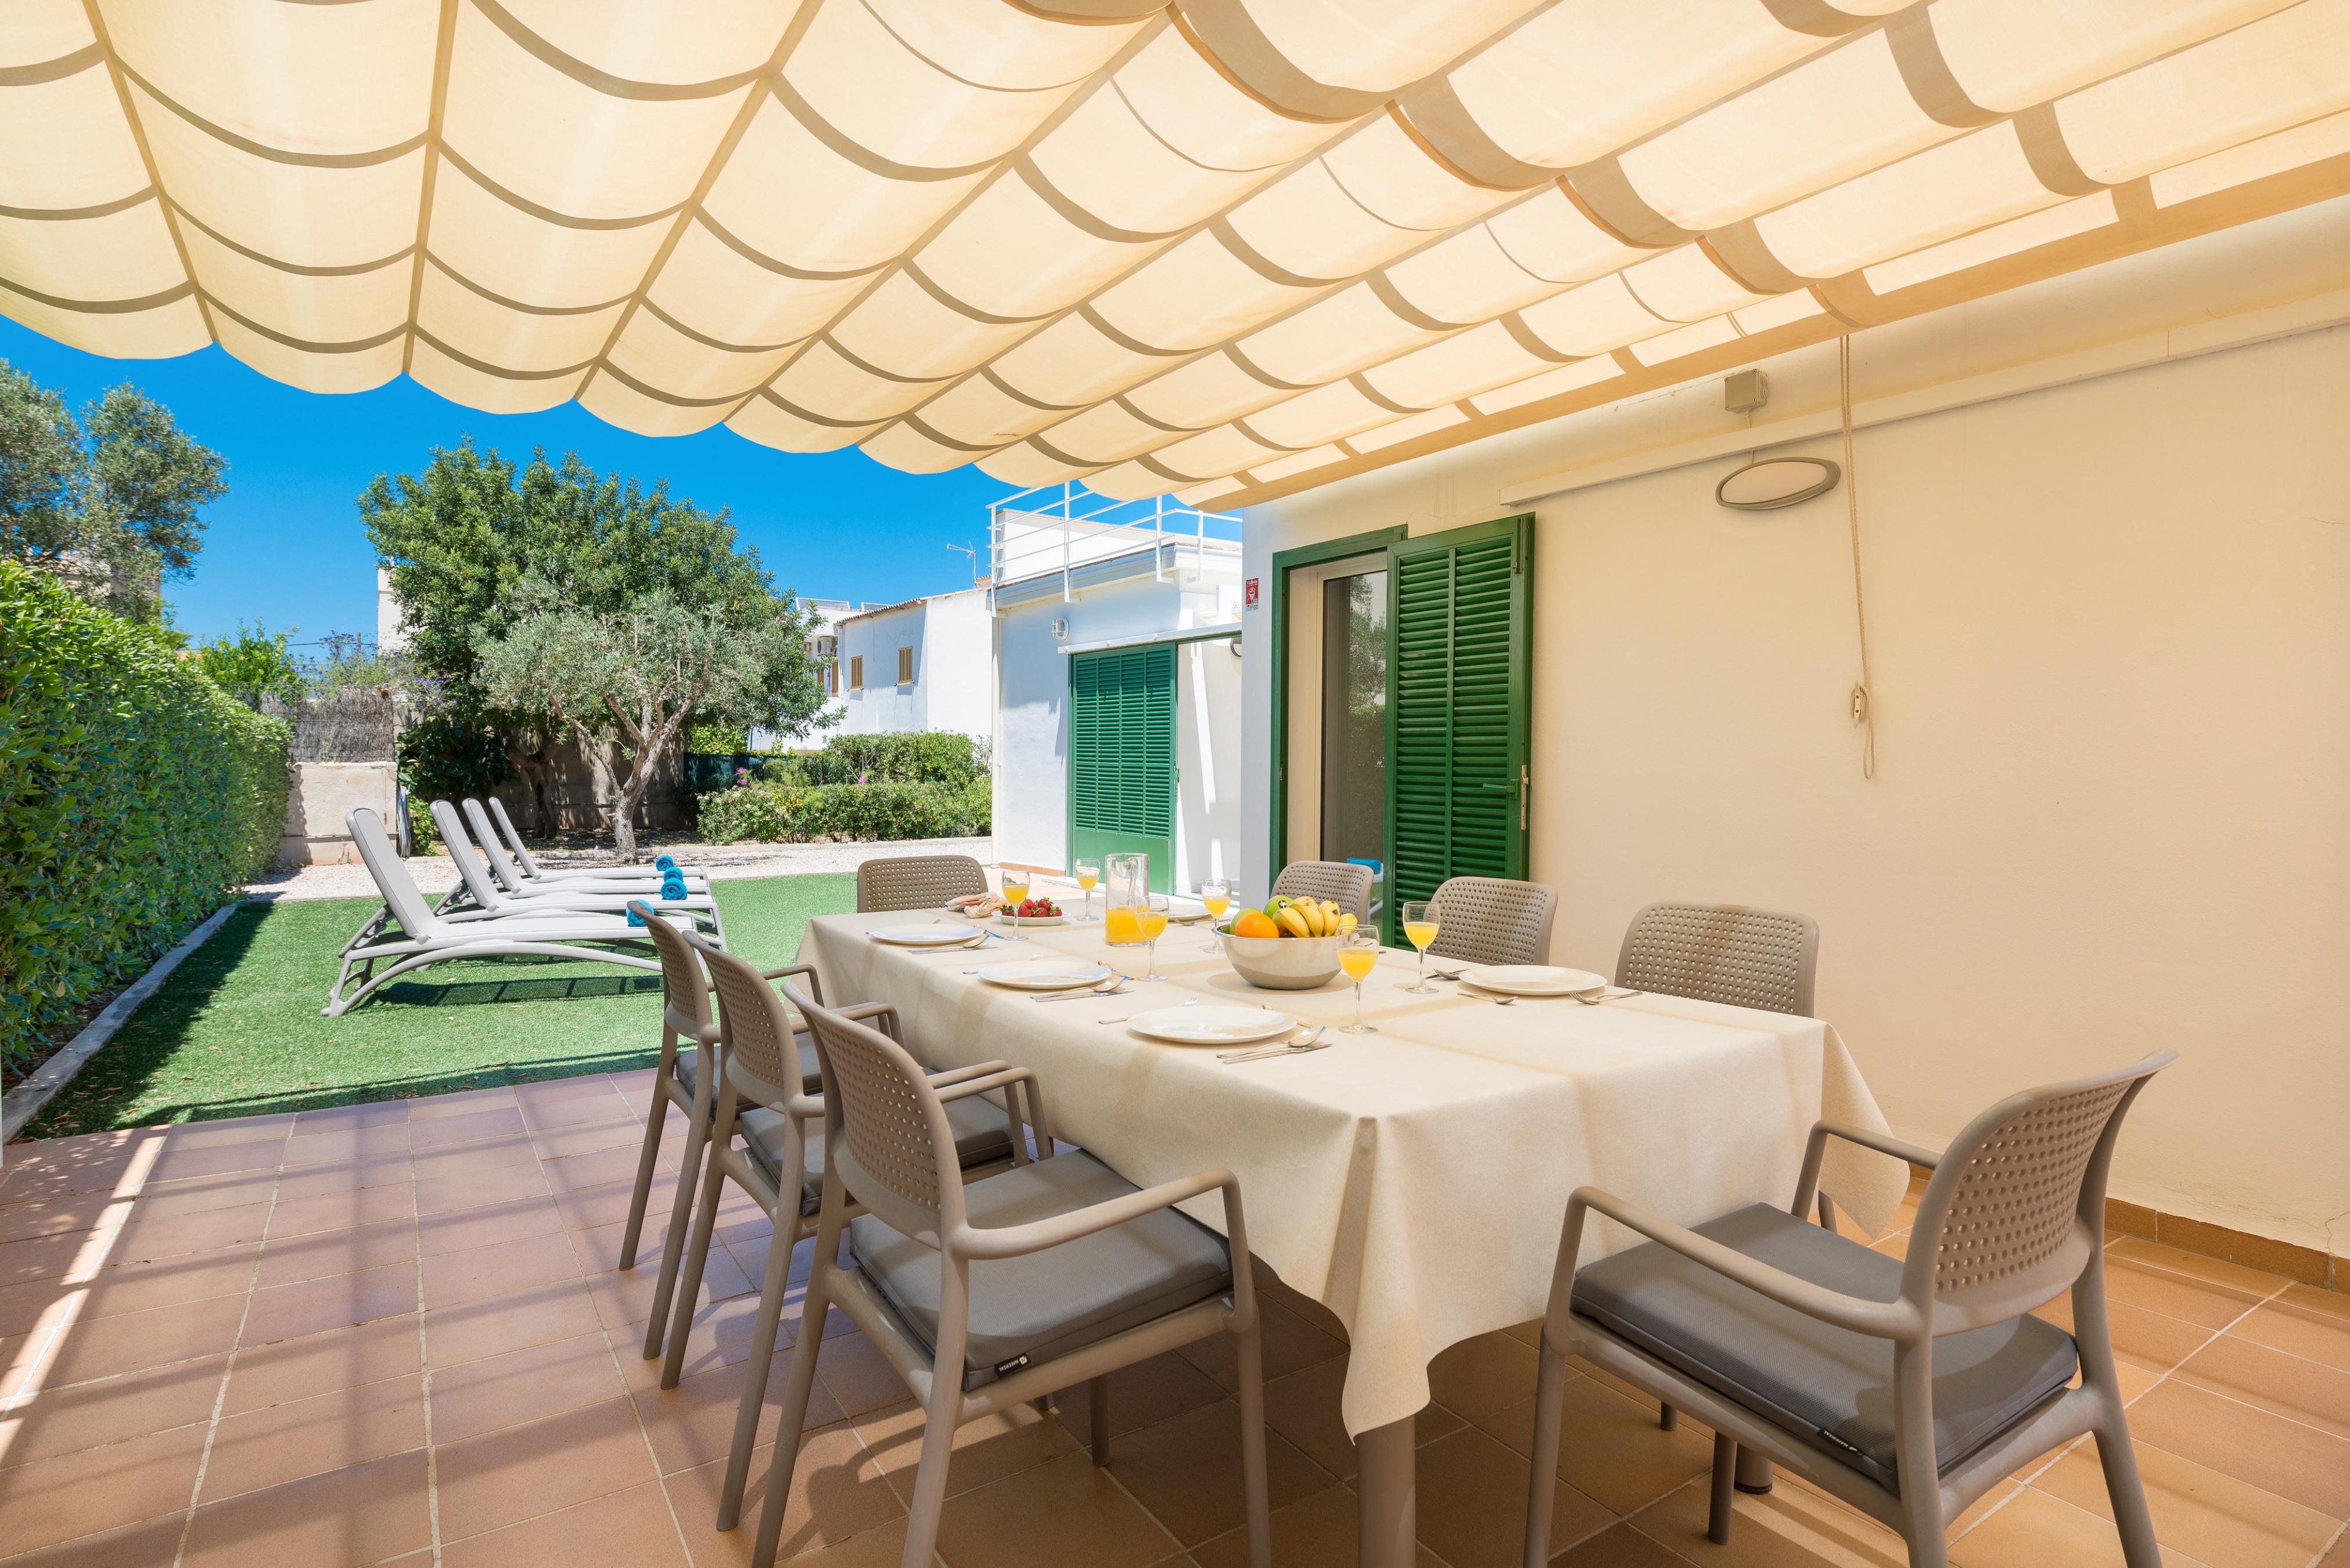 Property Image 2 - CAN ROIG (CALDES) - Chalet with private garden in Colonia de Sant Pere . Free WiFi